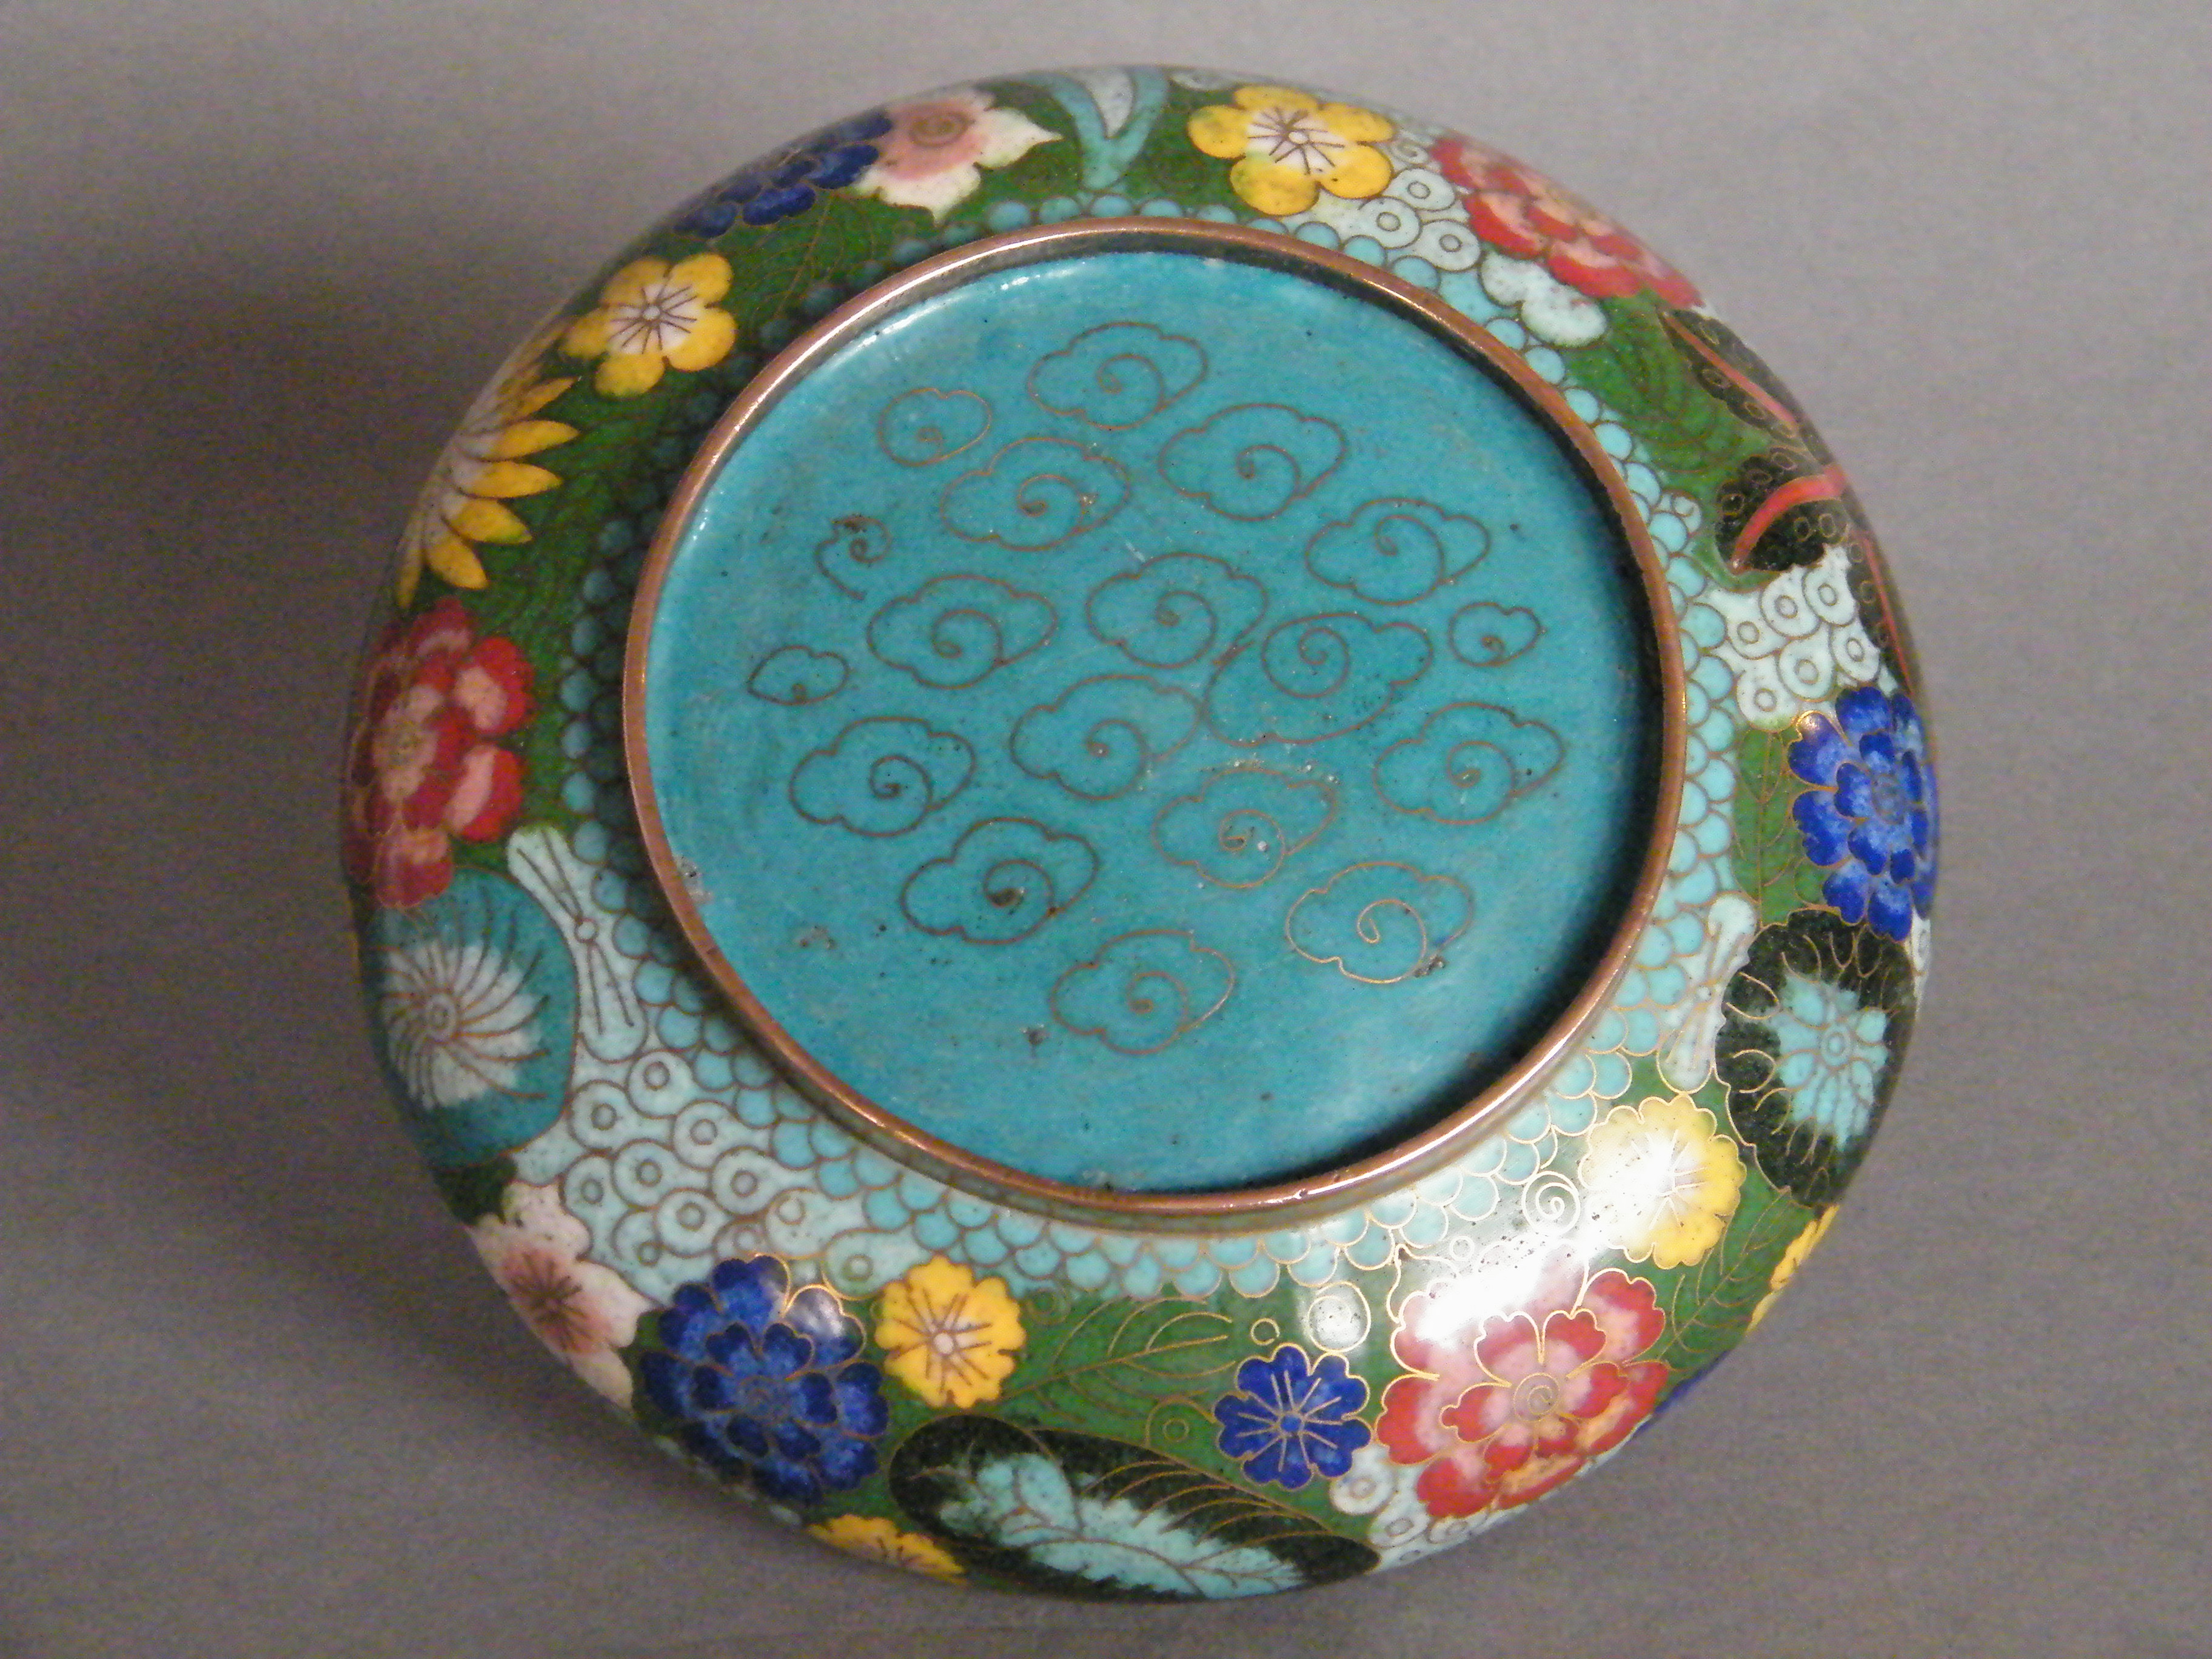 #0731  Chinese Millefleur Cloisonne Bowl Guangxu Reign (1875-1908)  **Sold**  to China - March 2012 售至中国 - 2012 年3月